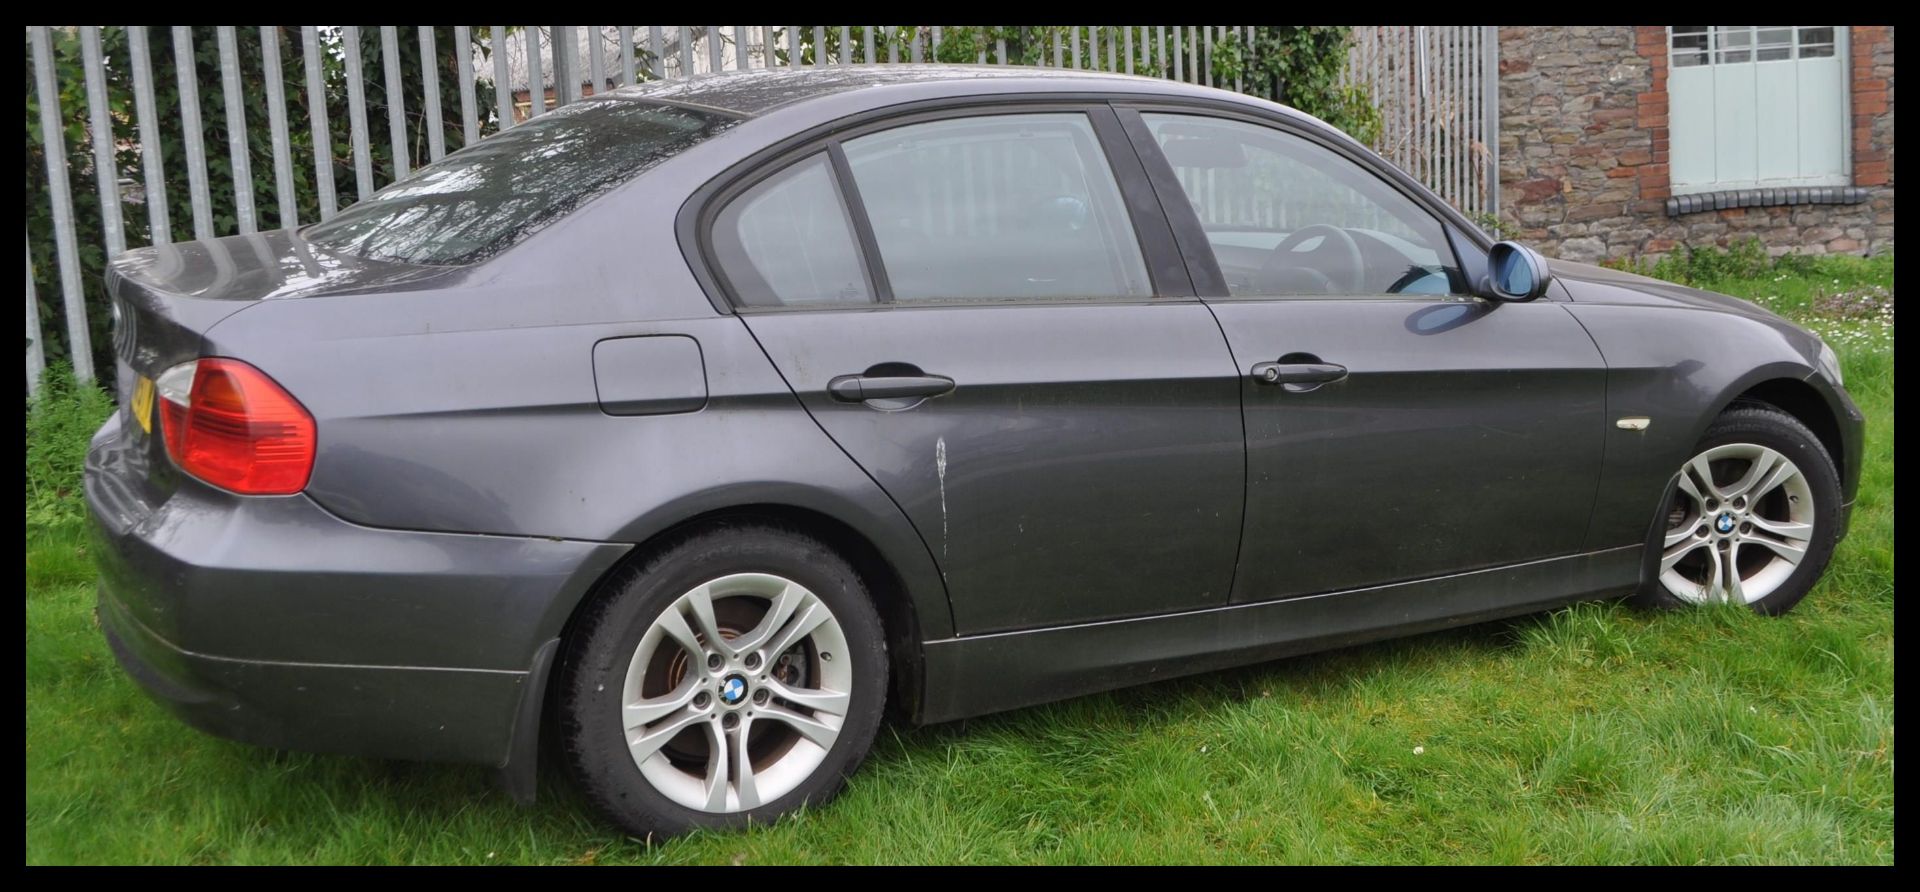 A 3 series 318i BMW five door saloon car. WN57 YGH - Image 2 of 12